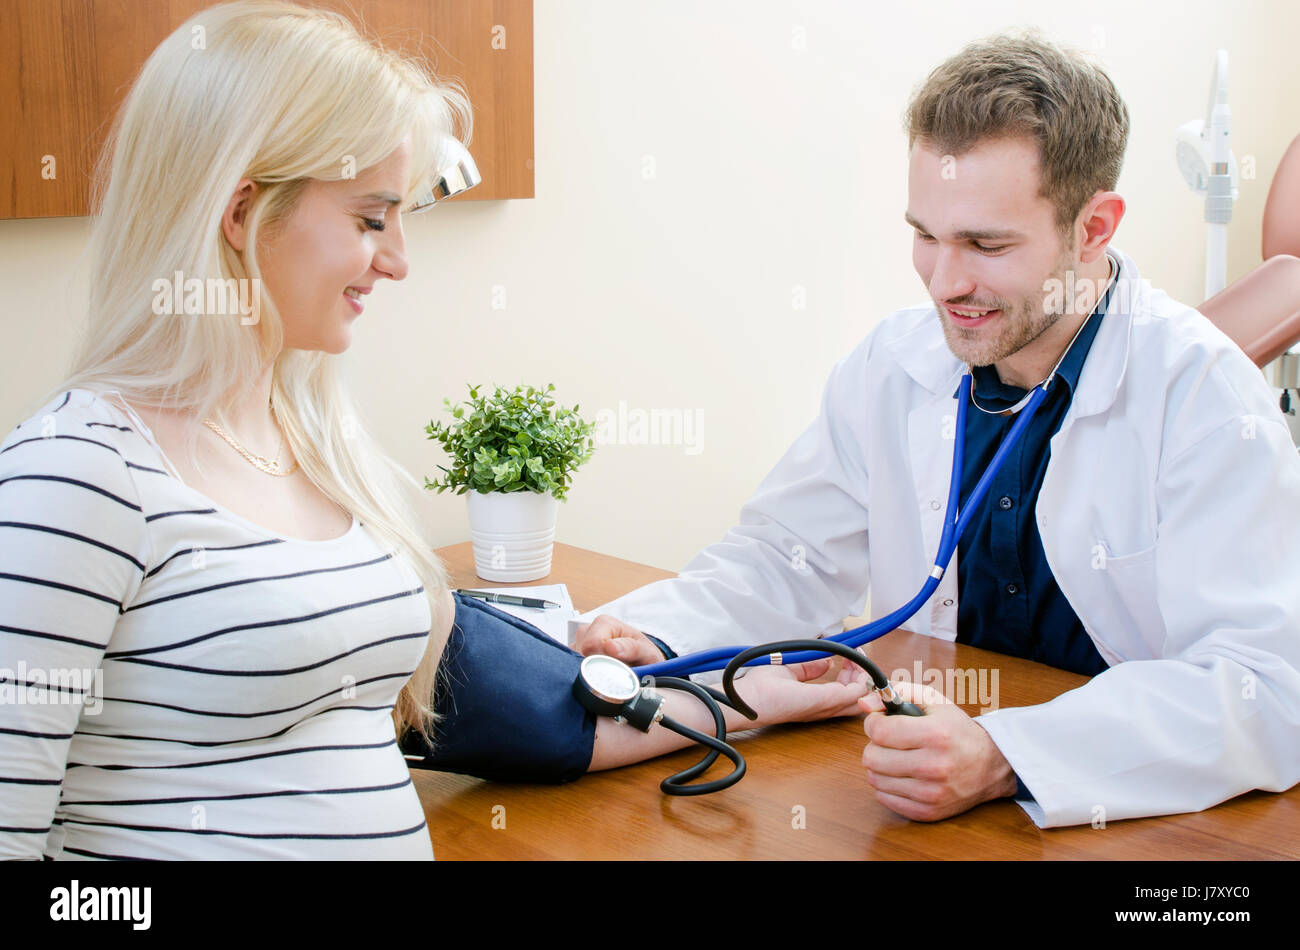 Young doctor checking blood pressure of female patient. pressure blood doctor patient medical heart sphygmomanometer measuring concept Stock Photo